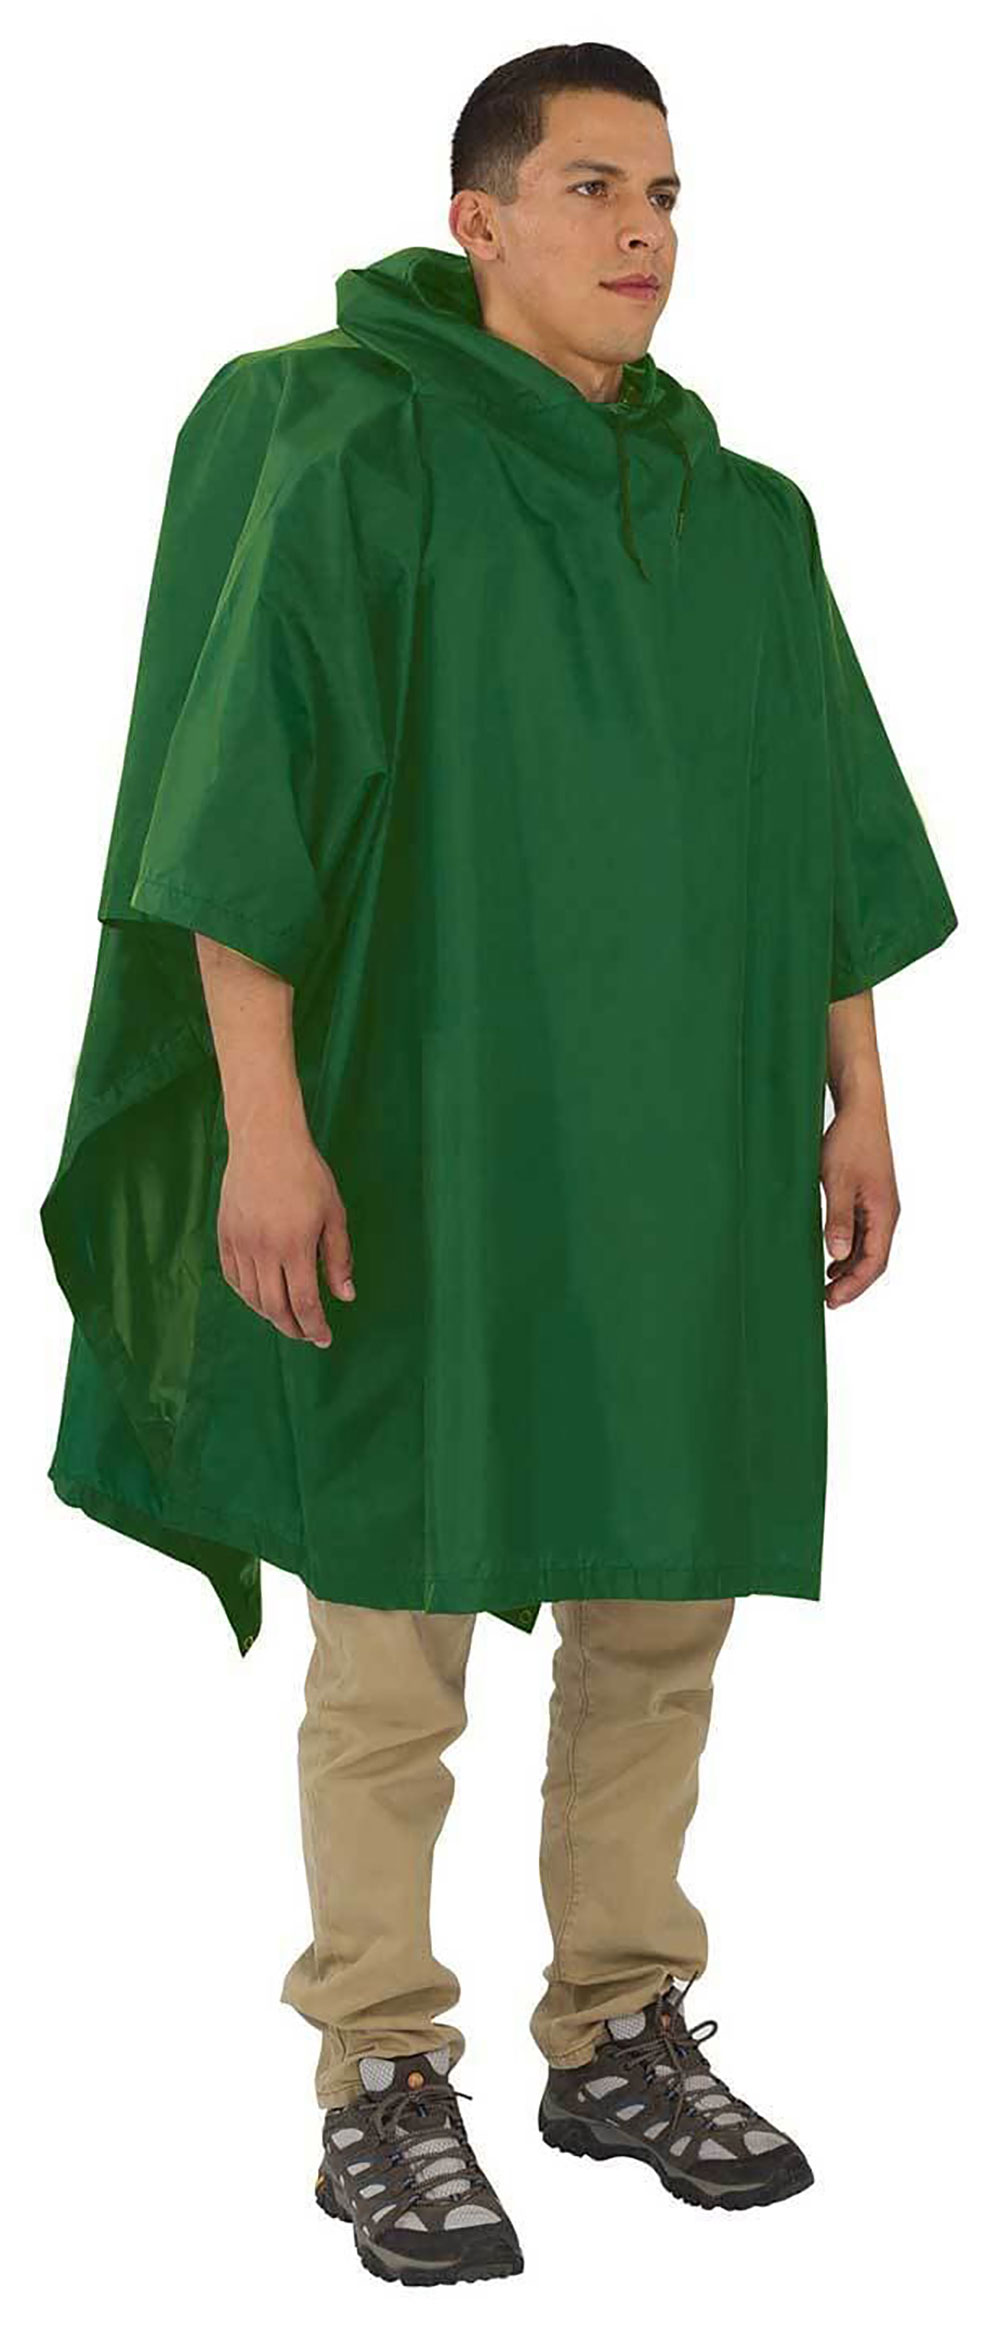 This Outdoor Products poncho